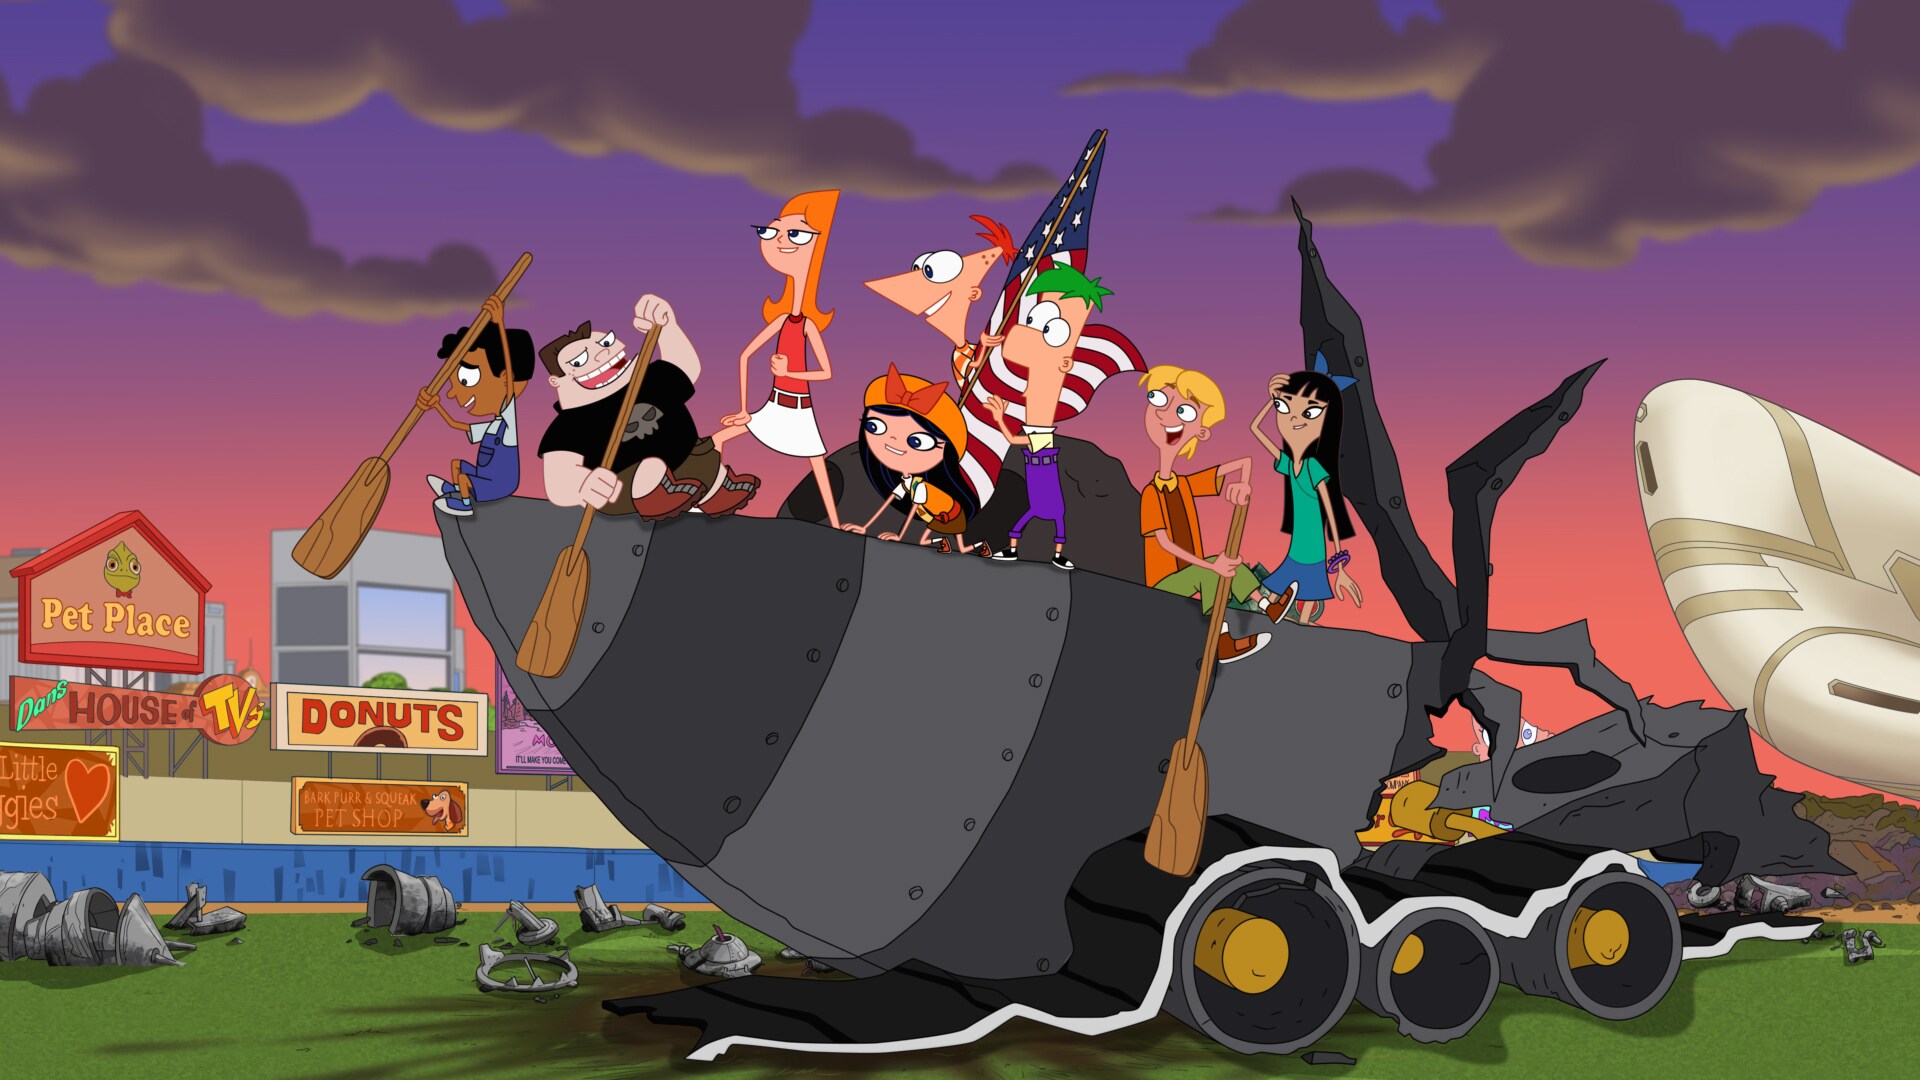 Review Disneys Phineas and Ferb movie a fun continuation of the series